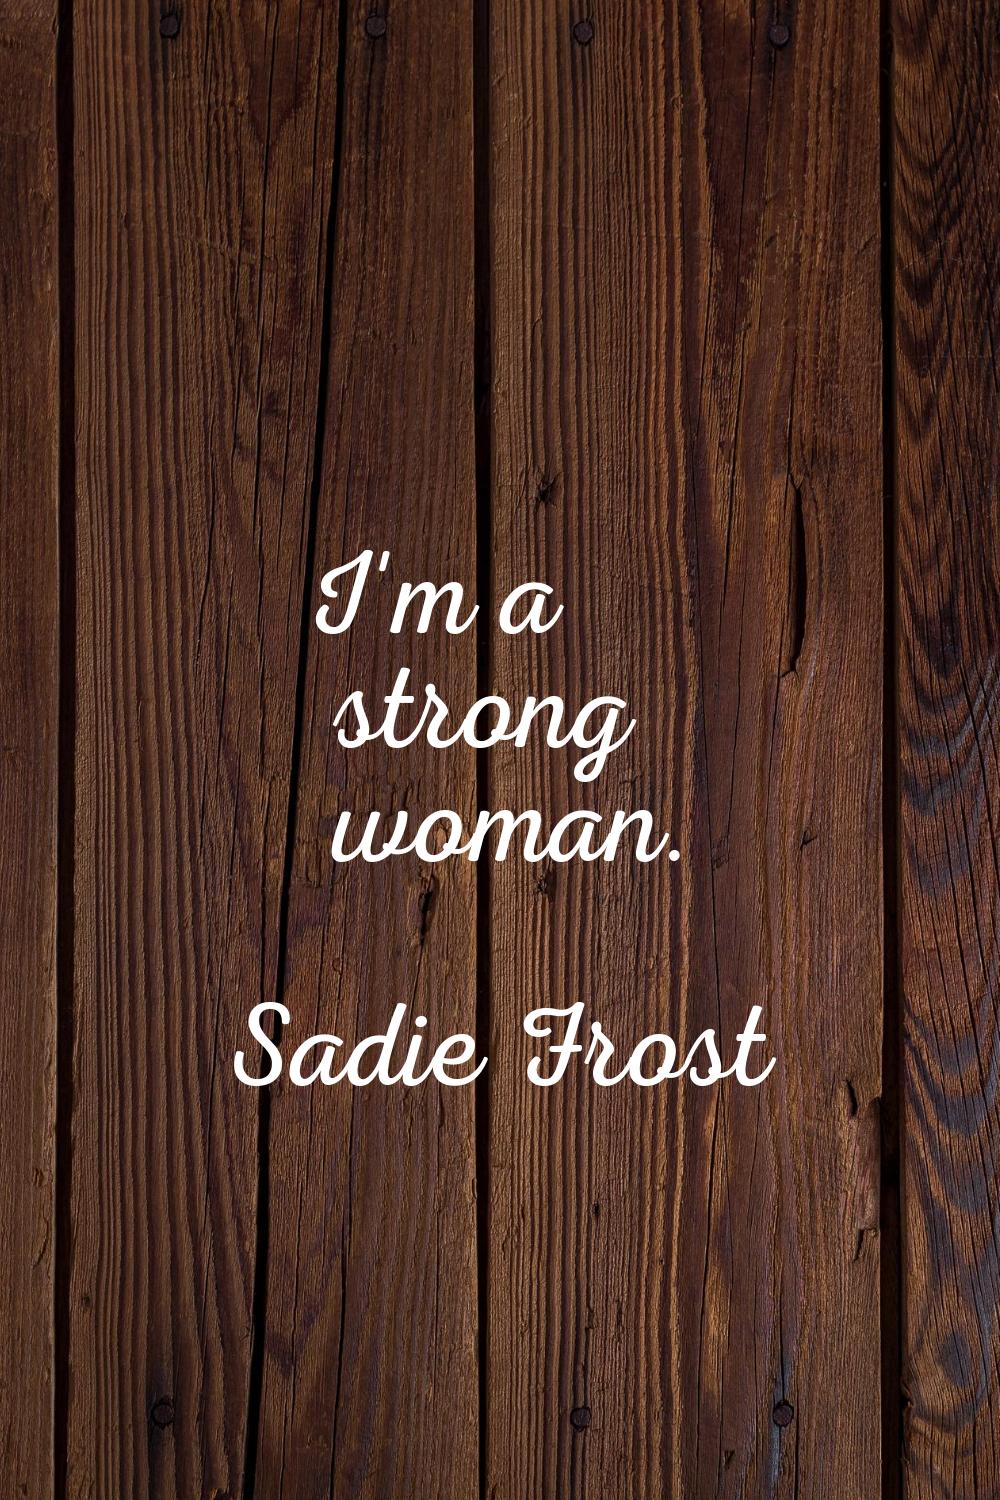 I'm a strong woman.